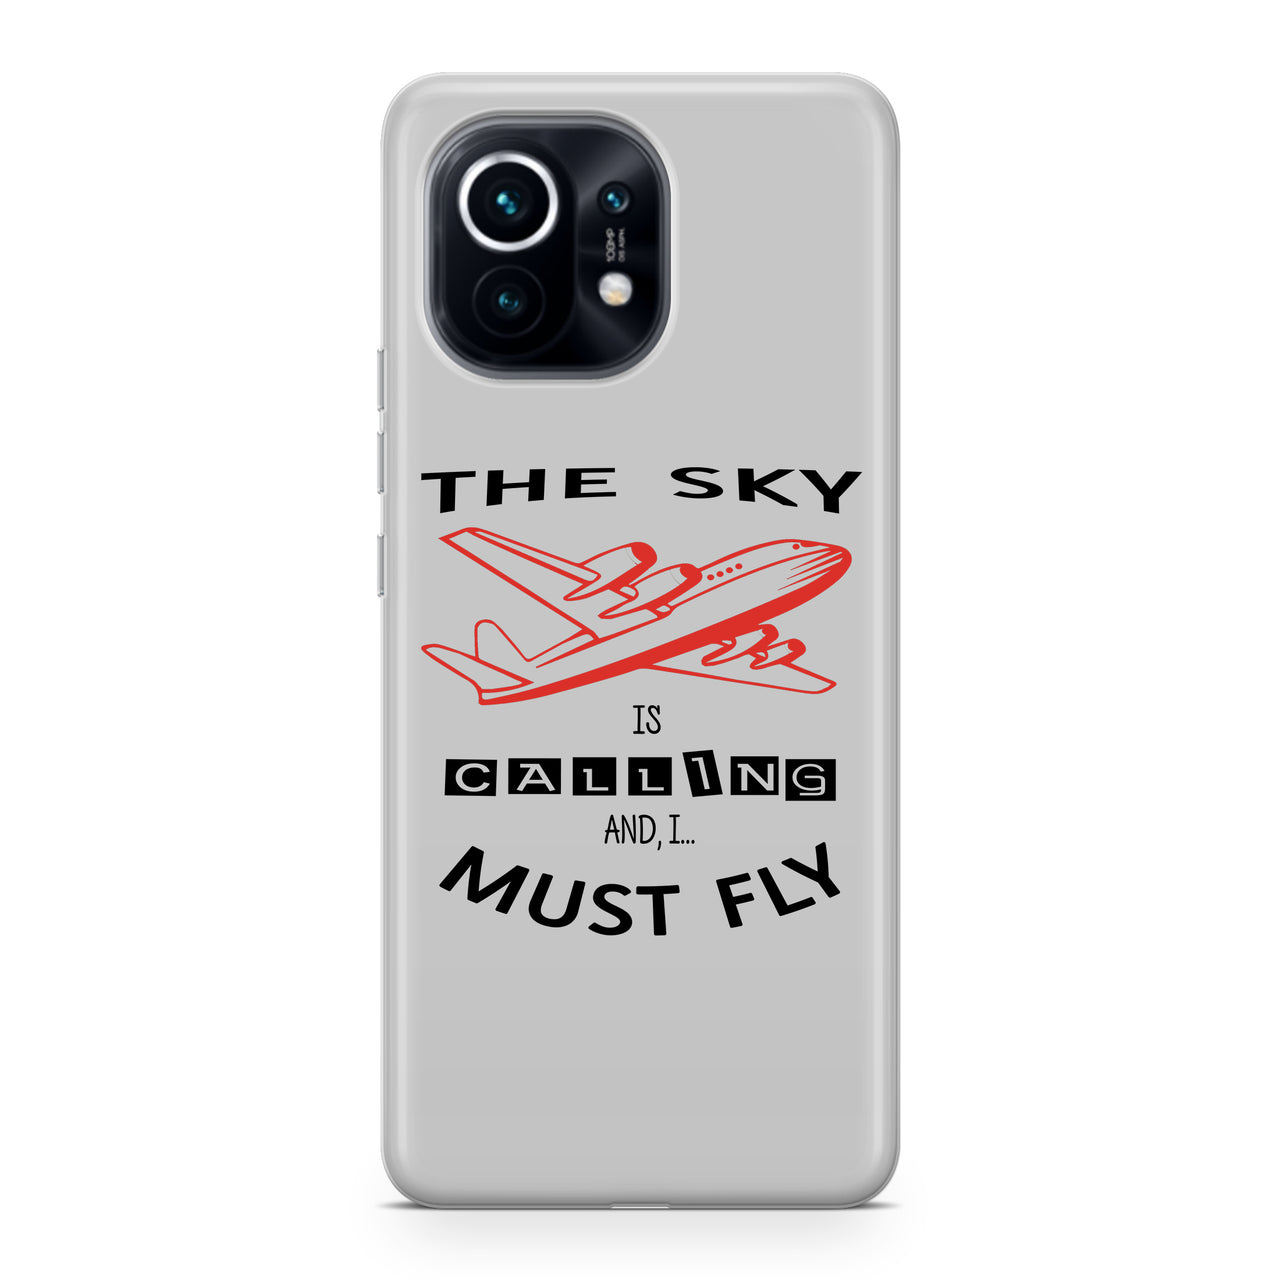 The Sky is Calling and I Must Fly Designed Xiaomi Cases